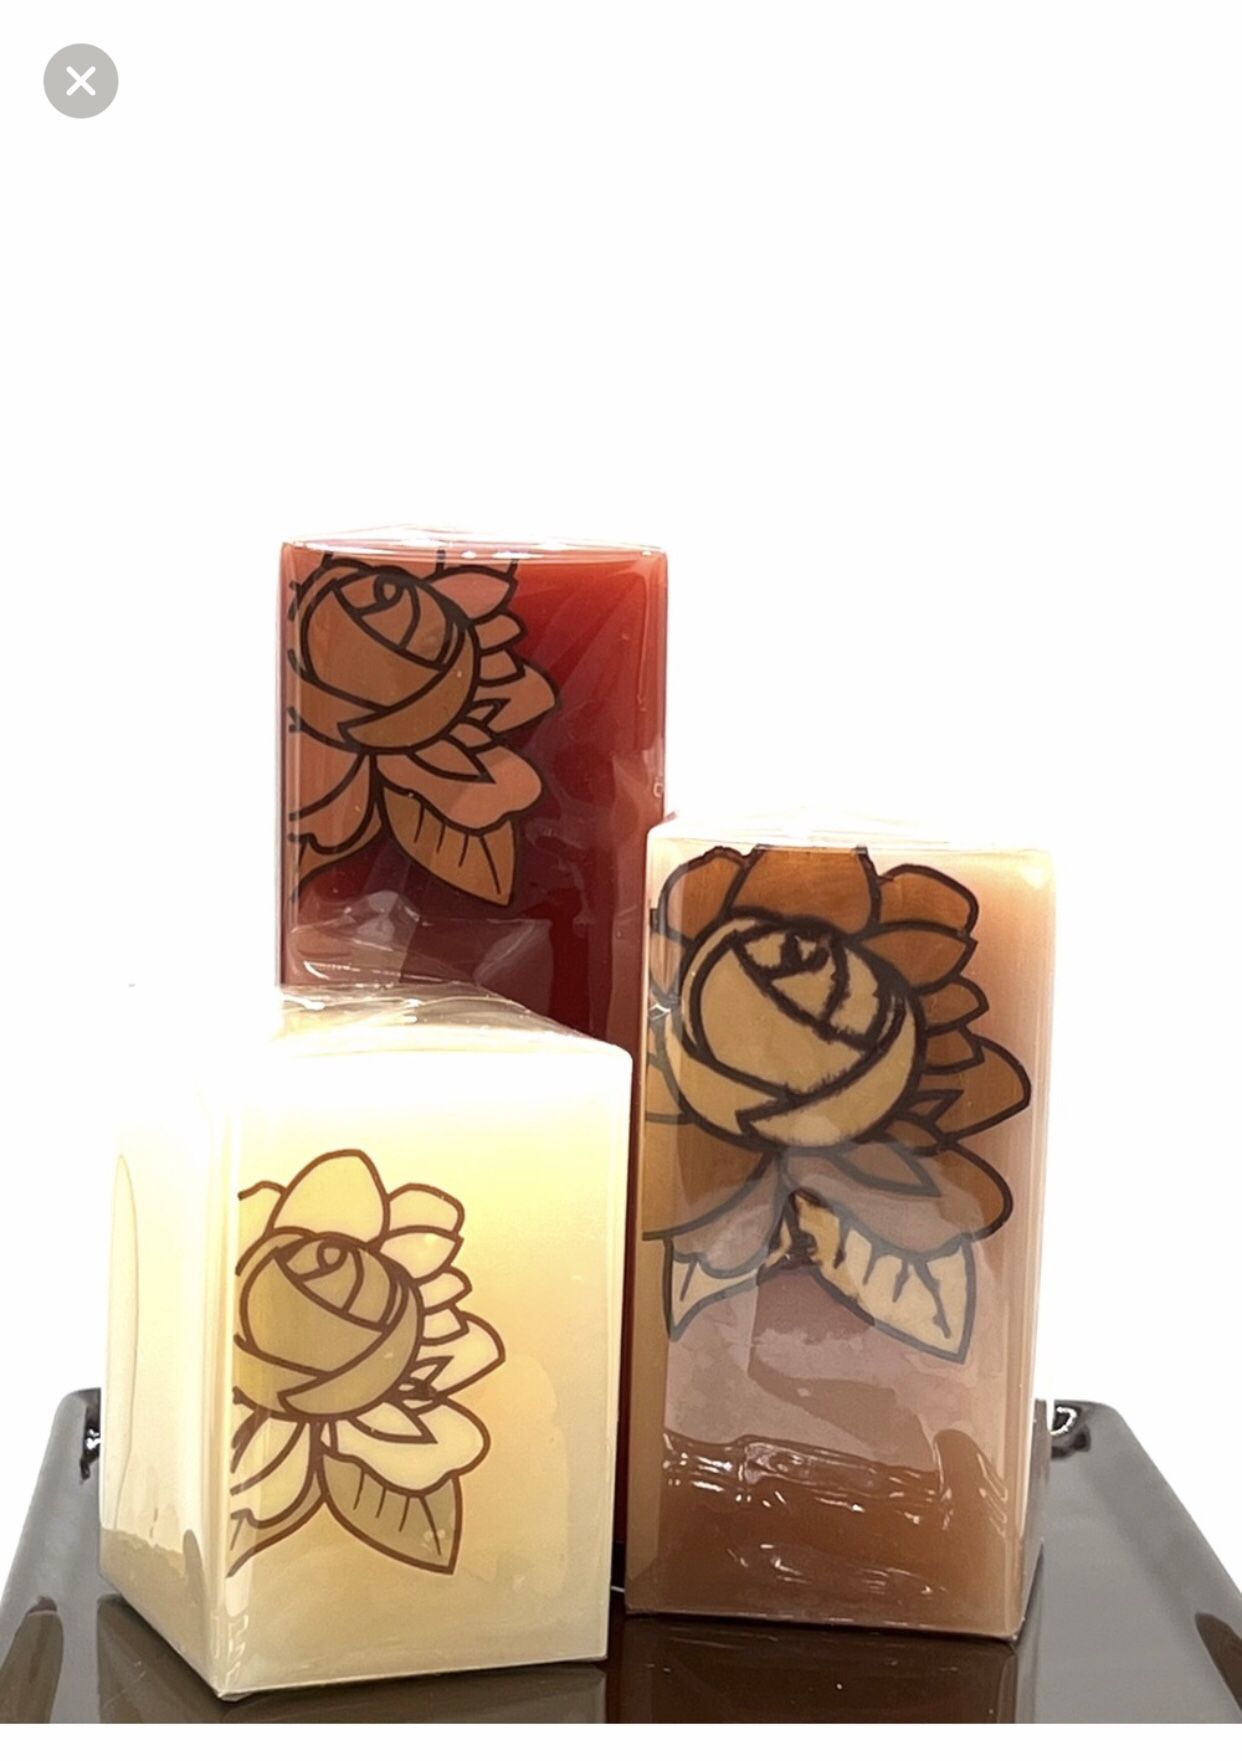 3 NIB Square Pillar Candles With Tray Retired Spa Finder By AVON 2008 Earthly Floral Design